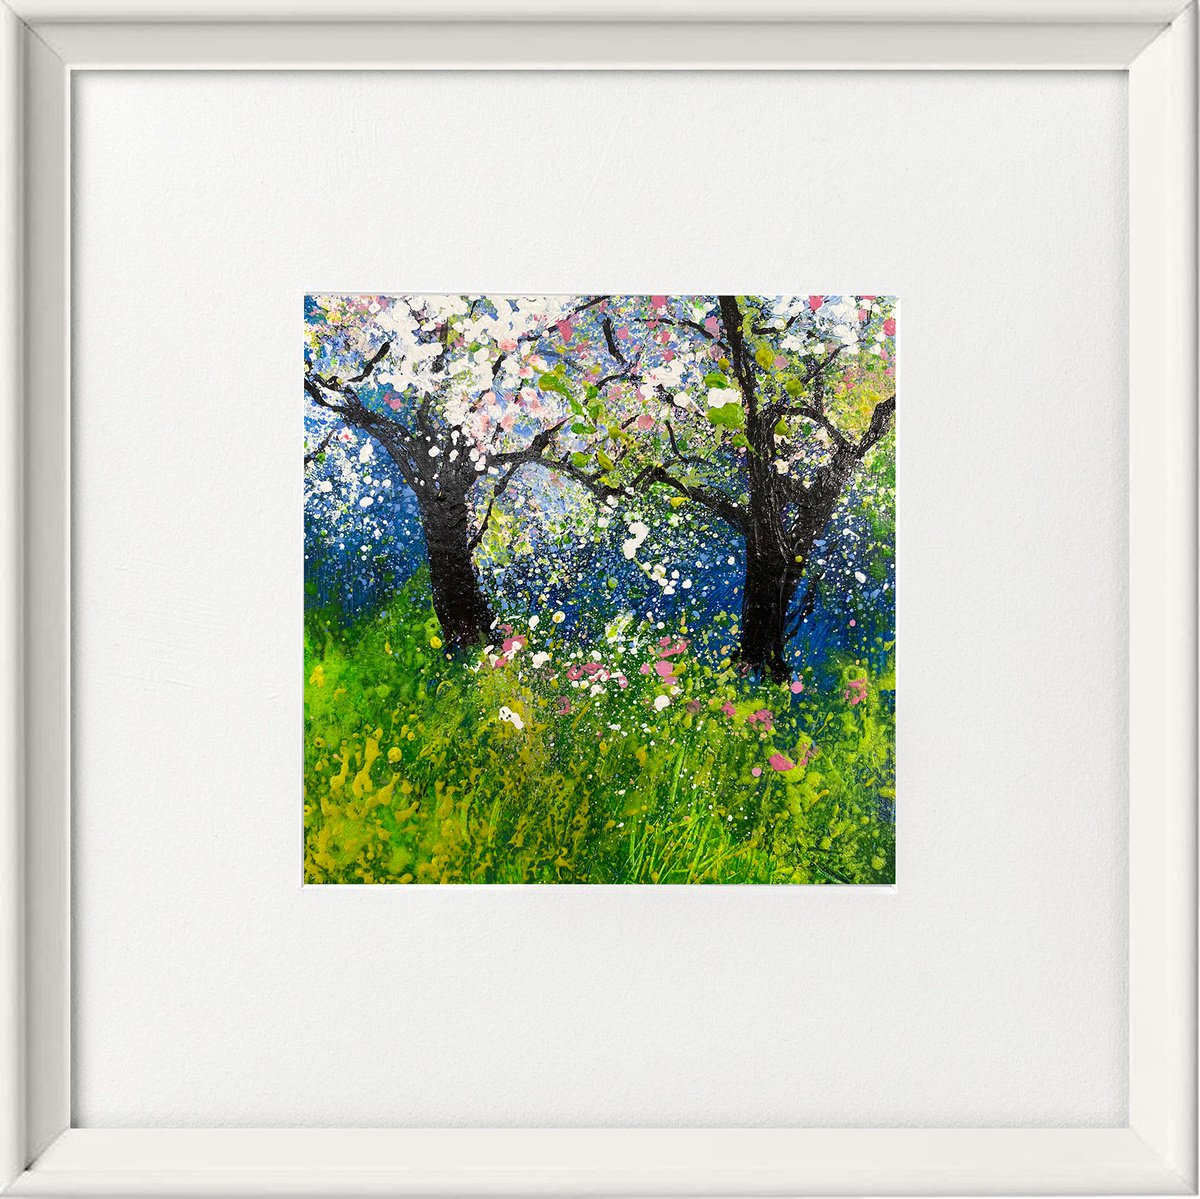 Orchard Series - falling blossom by Teresa Tanner